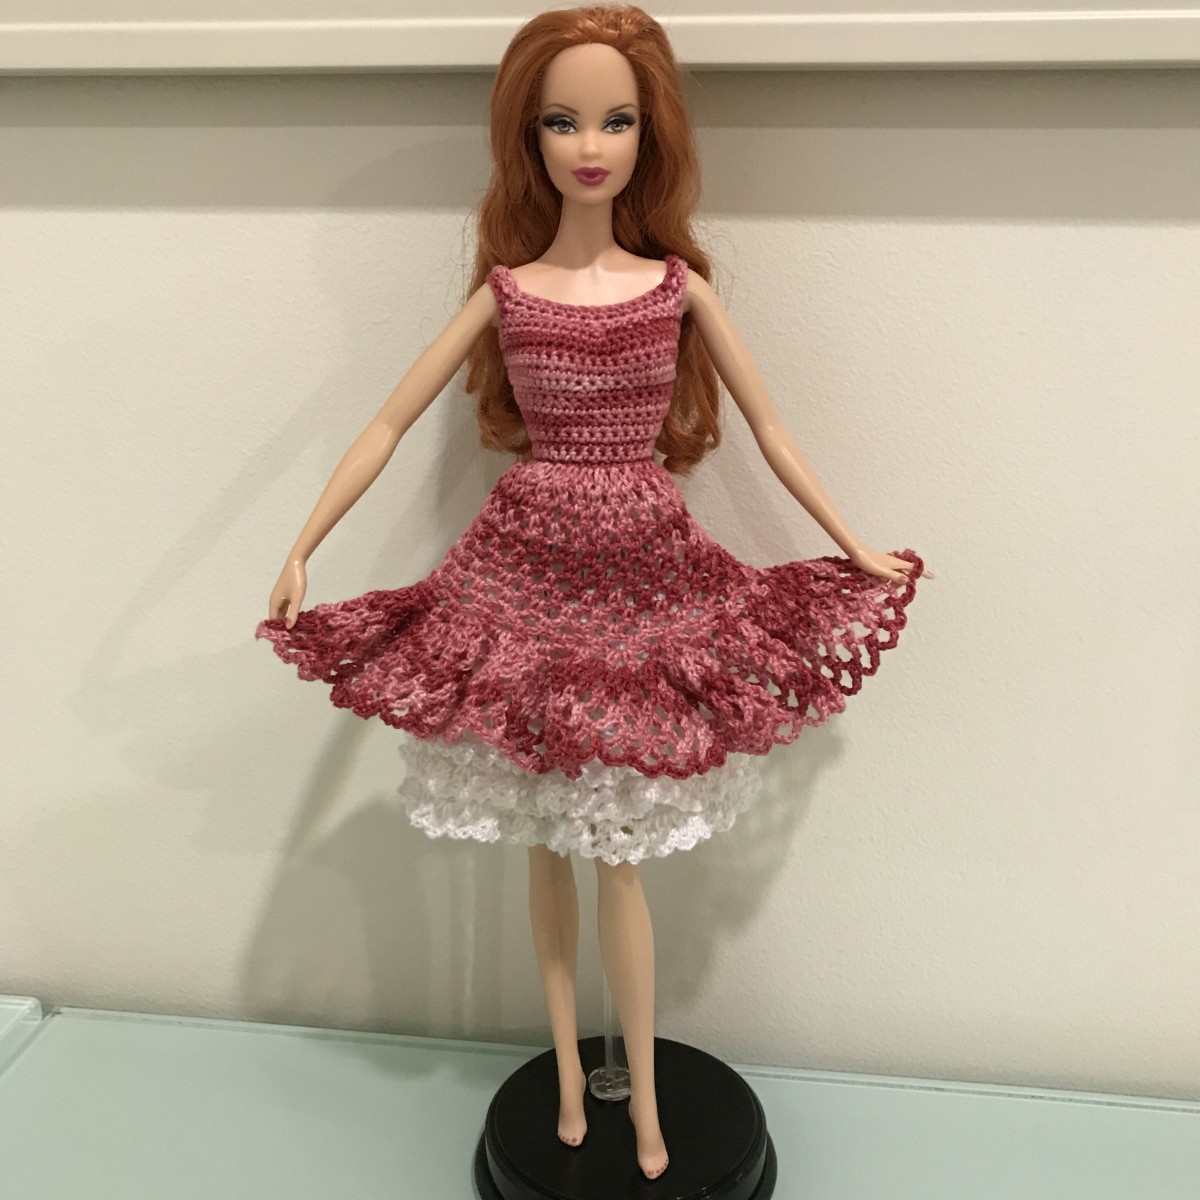 Barbie holding the skirt wide with her hands